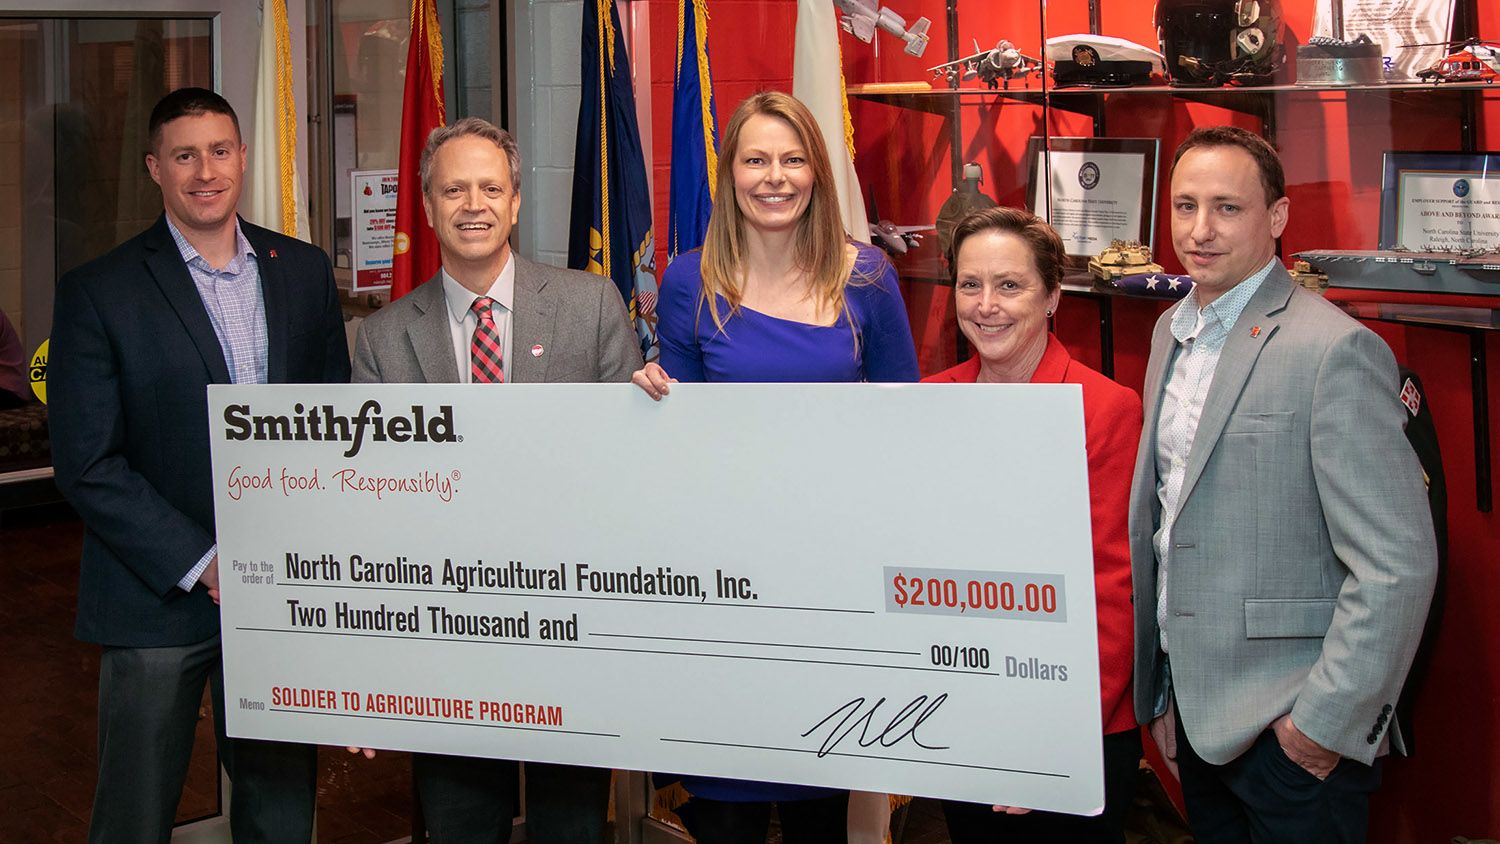 Smithfield Foods donates to CALS' Soldier to Agriculture Program